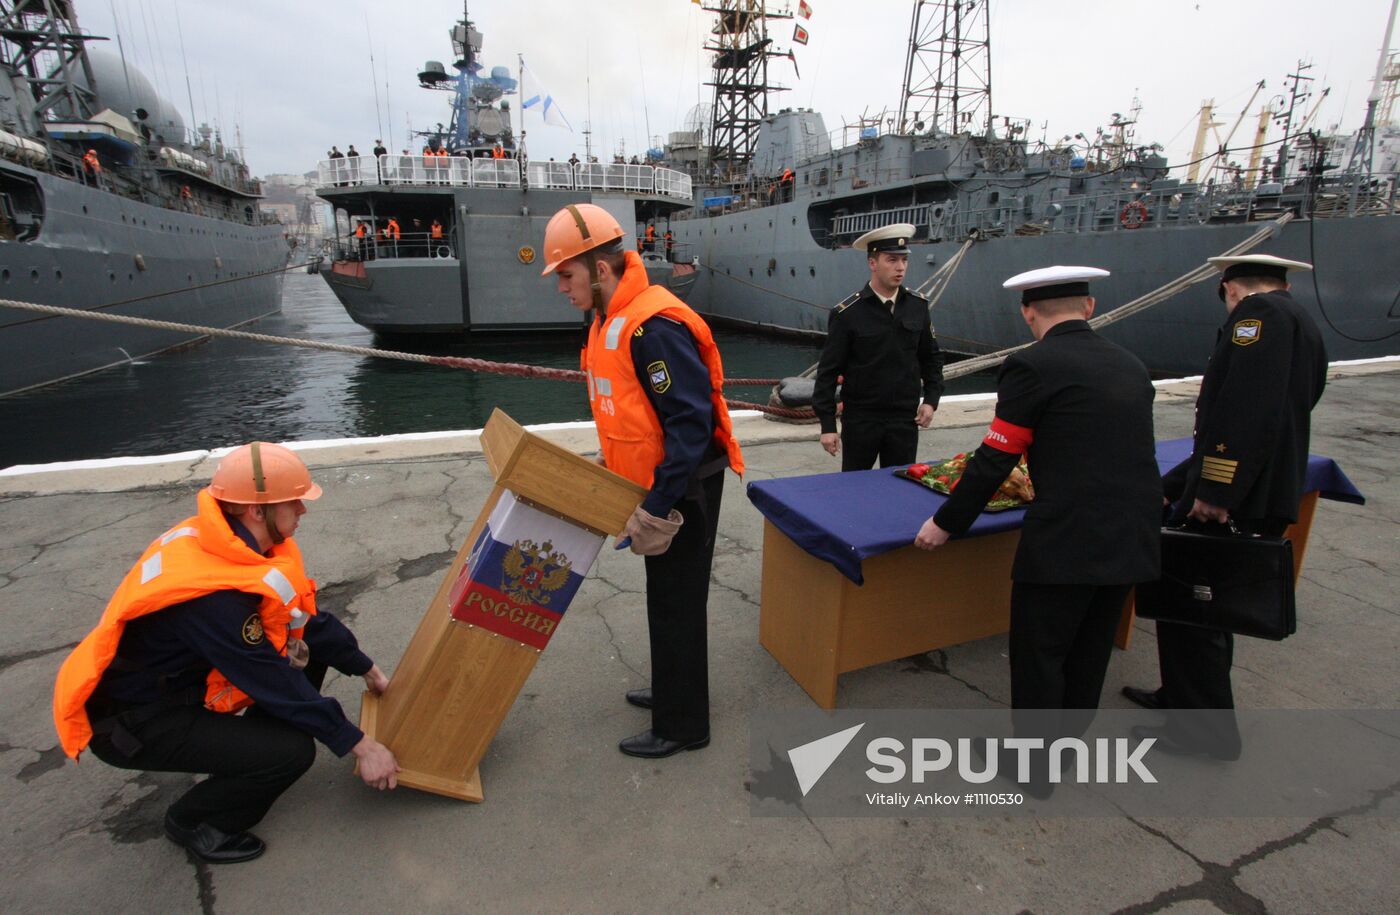 "Admiral Tributs" anti-submarine ship welcomed back